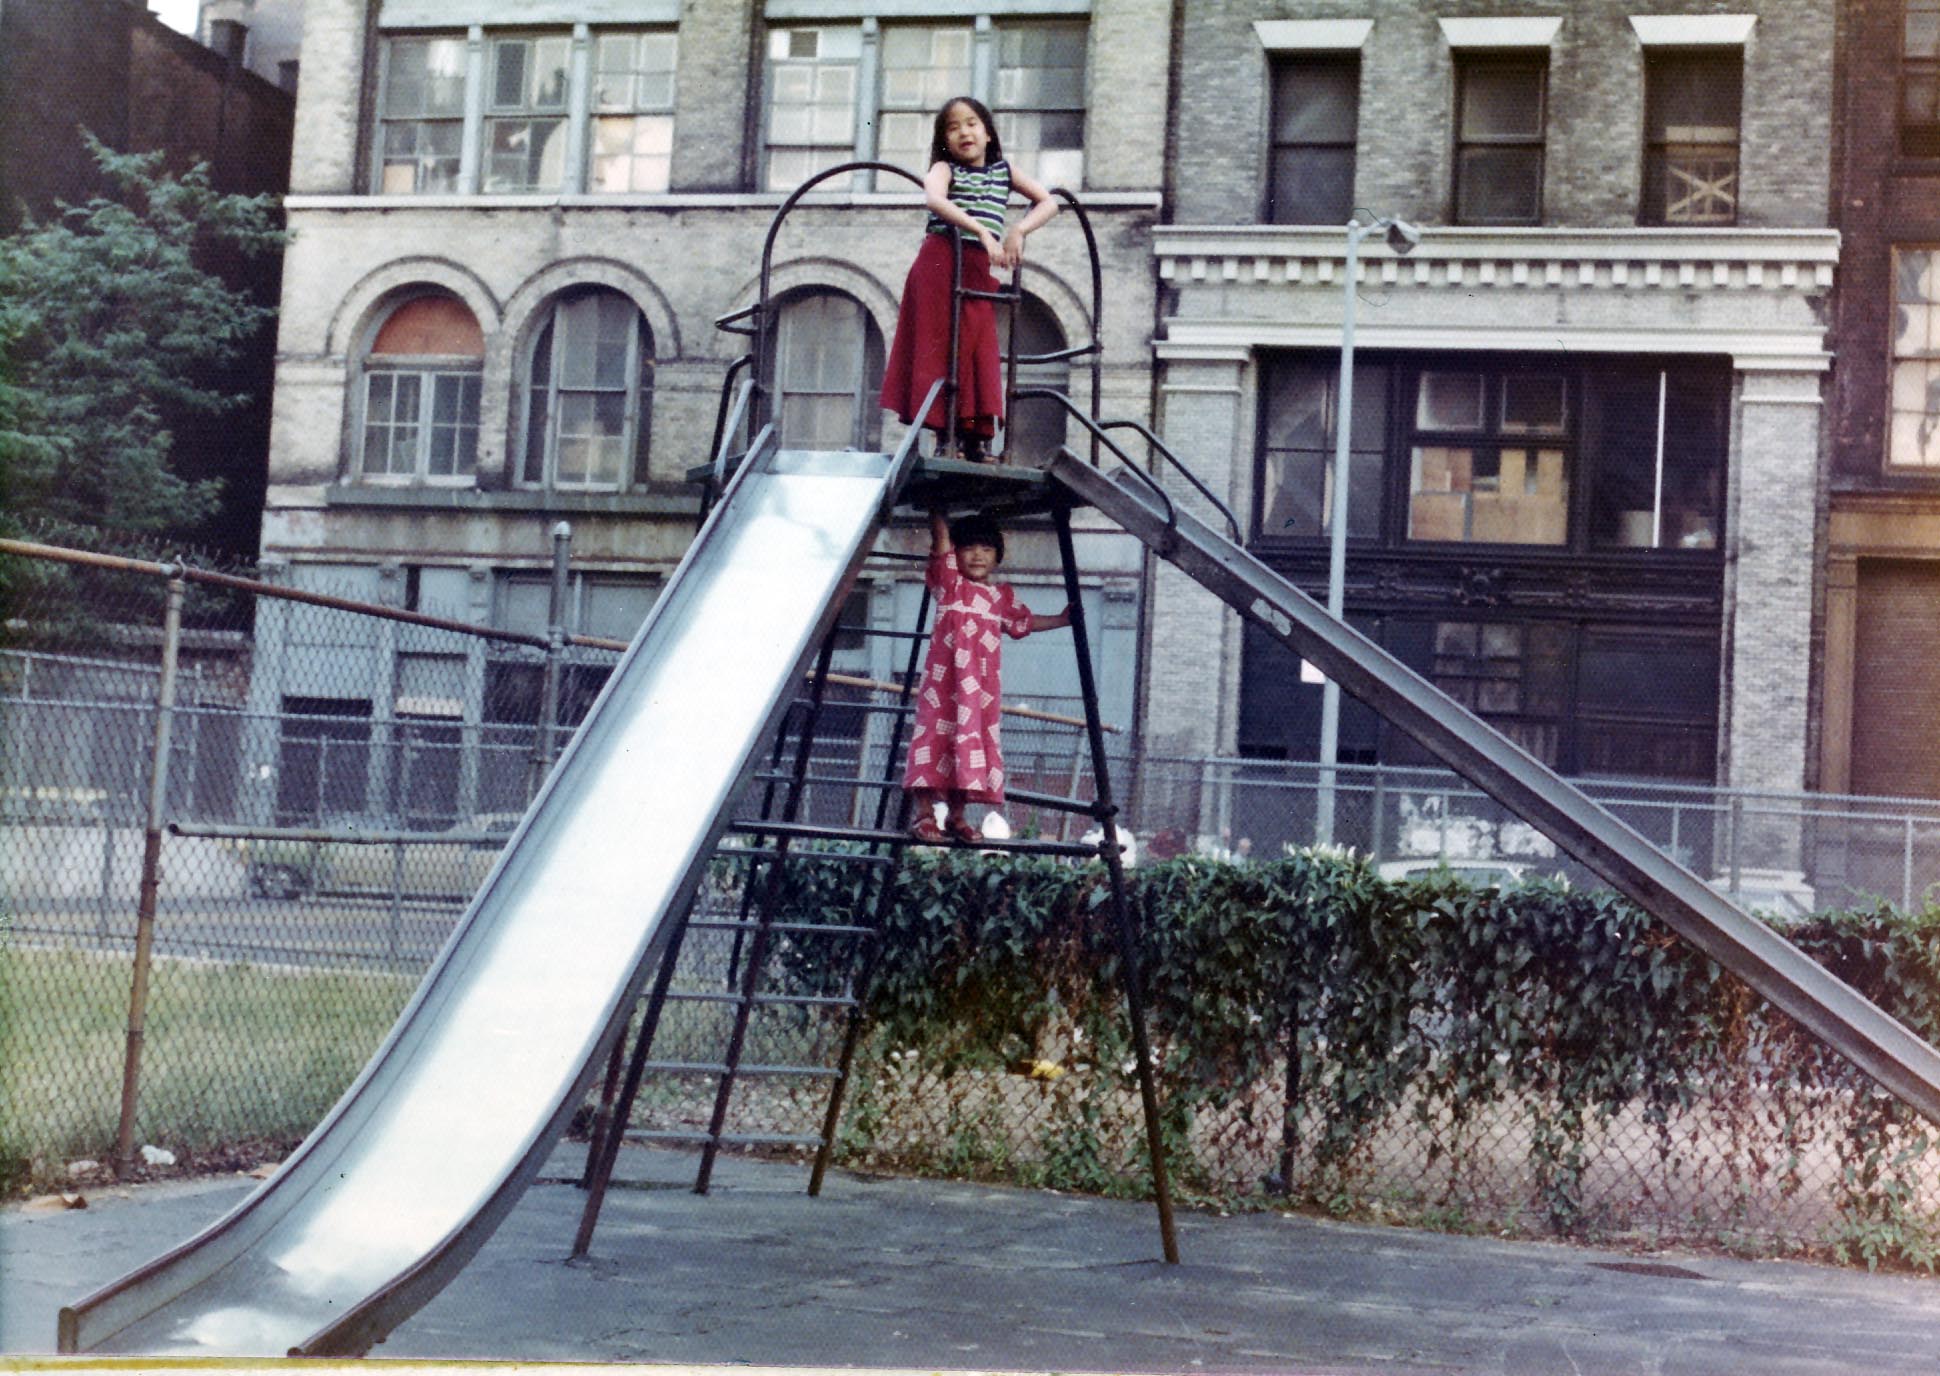 The big slide in the old NYU playground (Mercer Street in background)